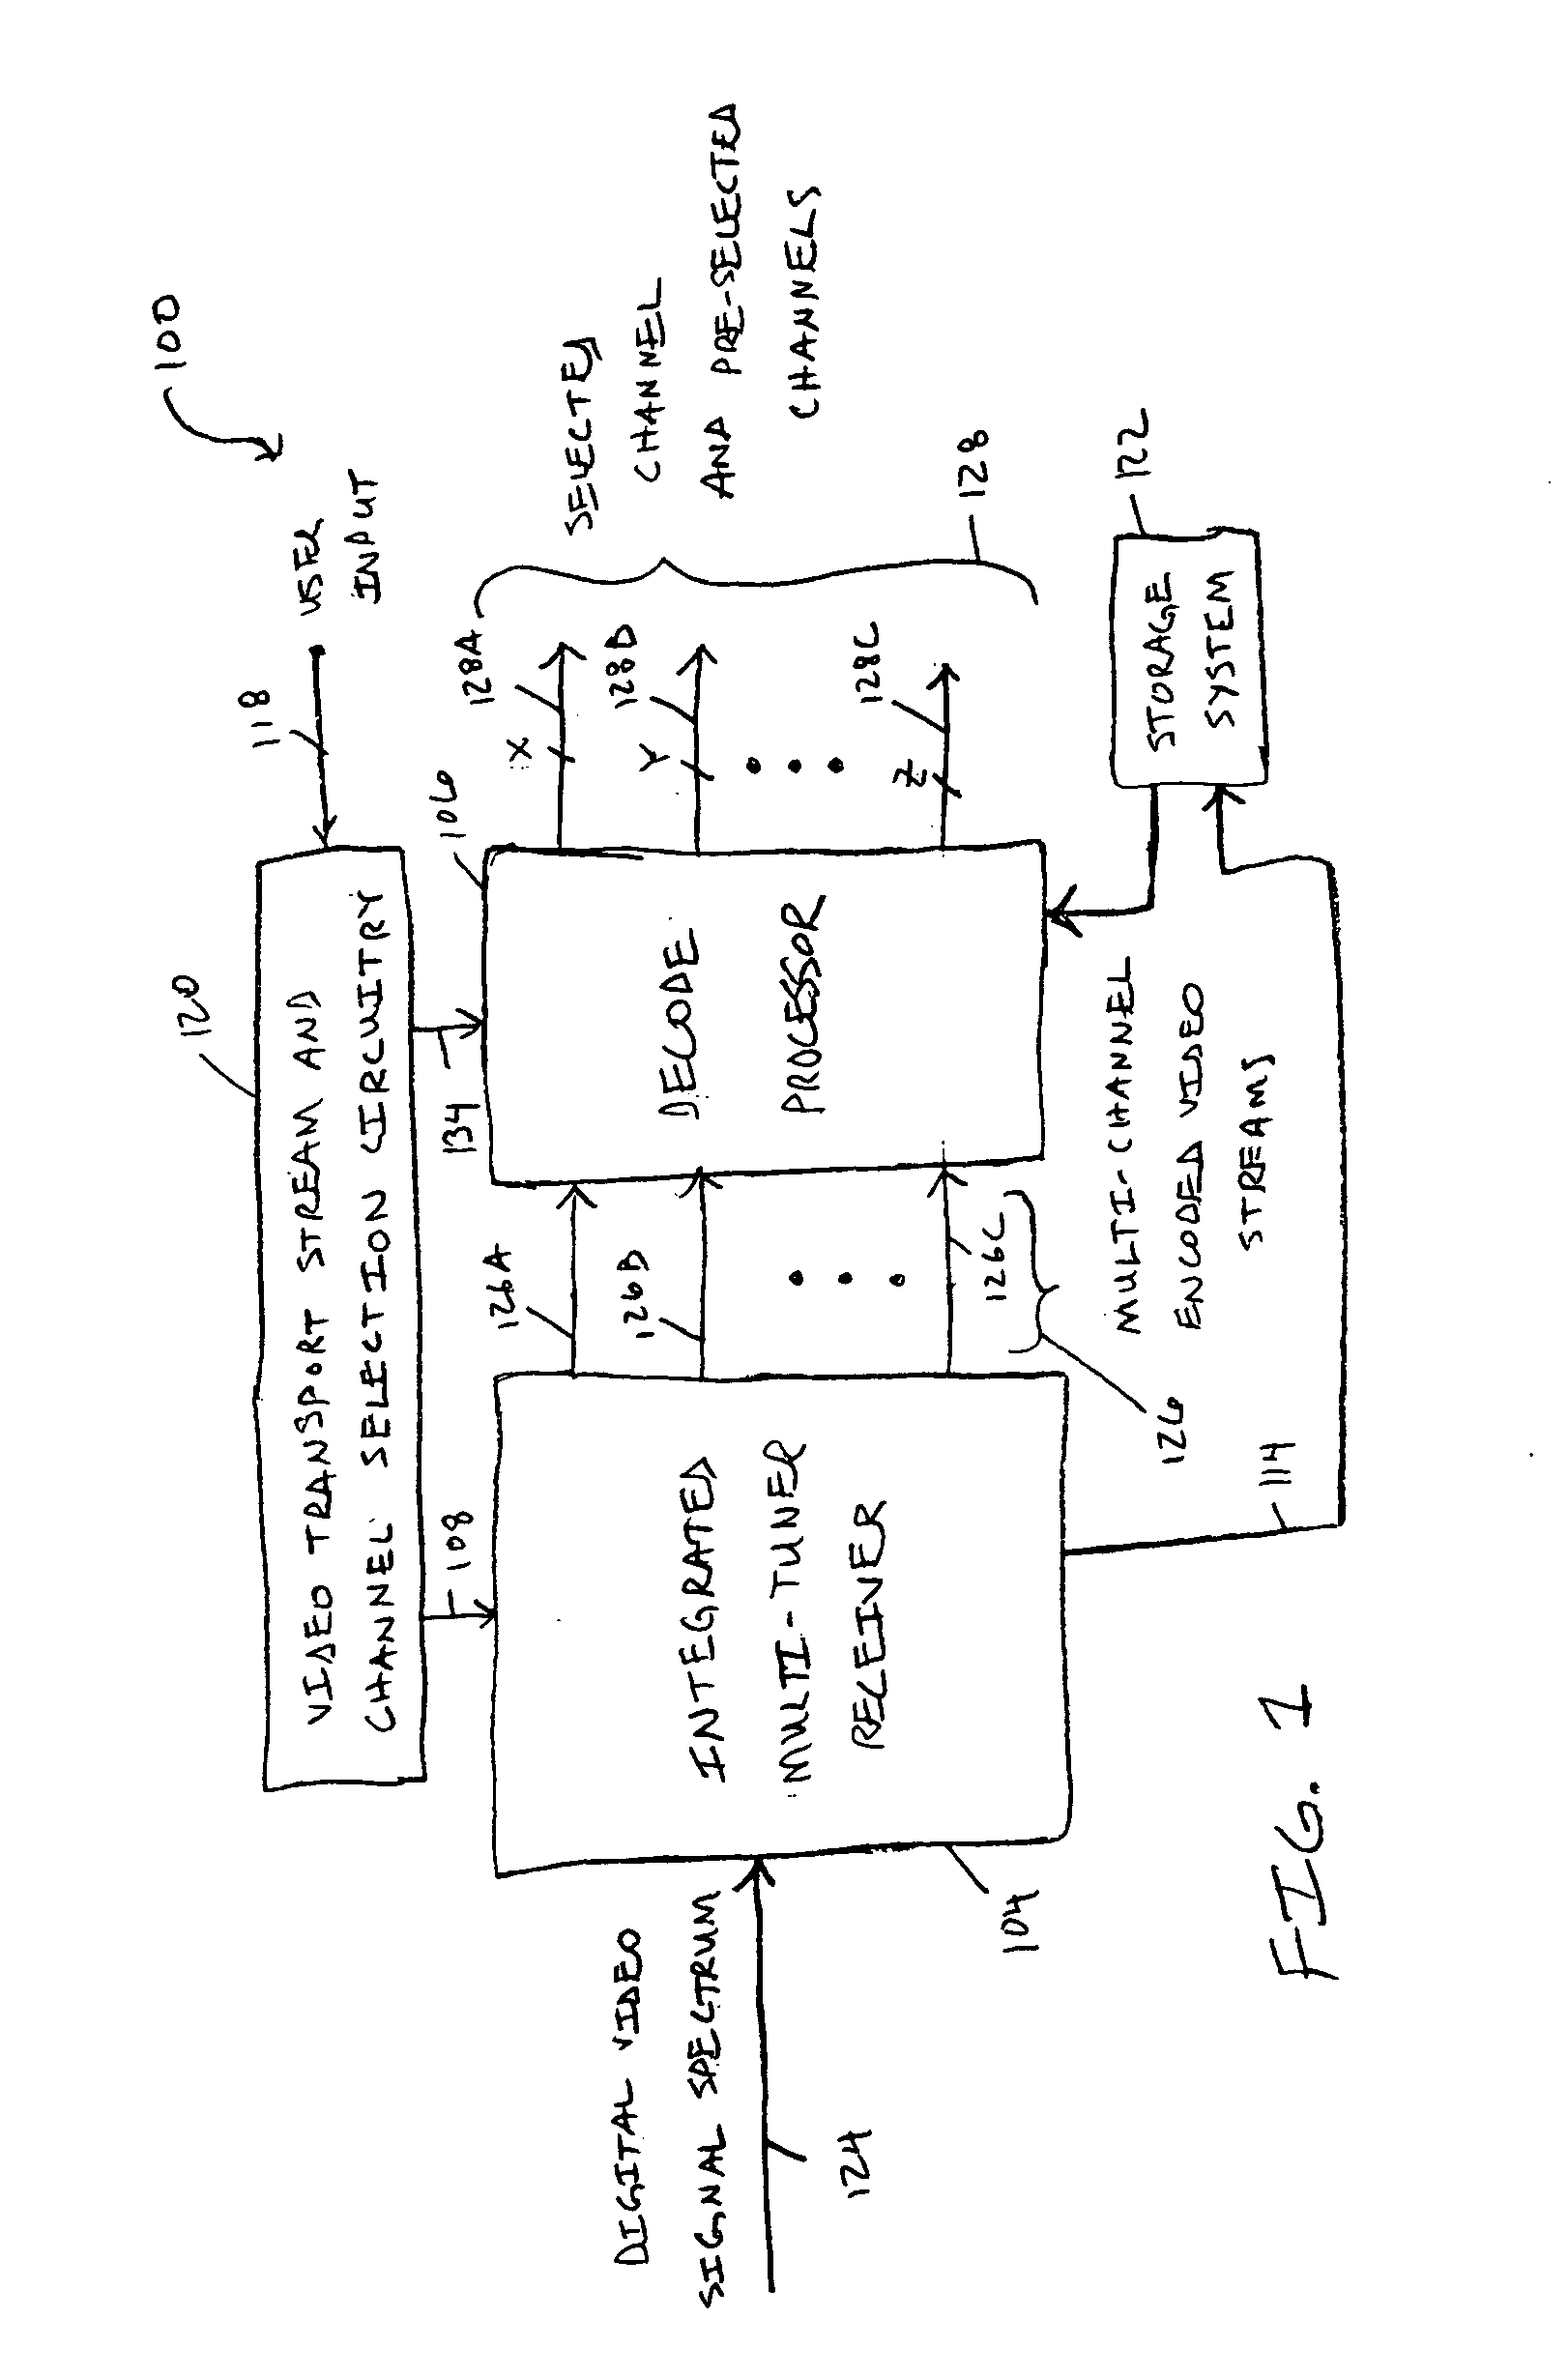 Transport stream and channel selection system for digital video receiver systems and associated method